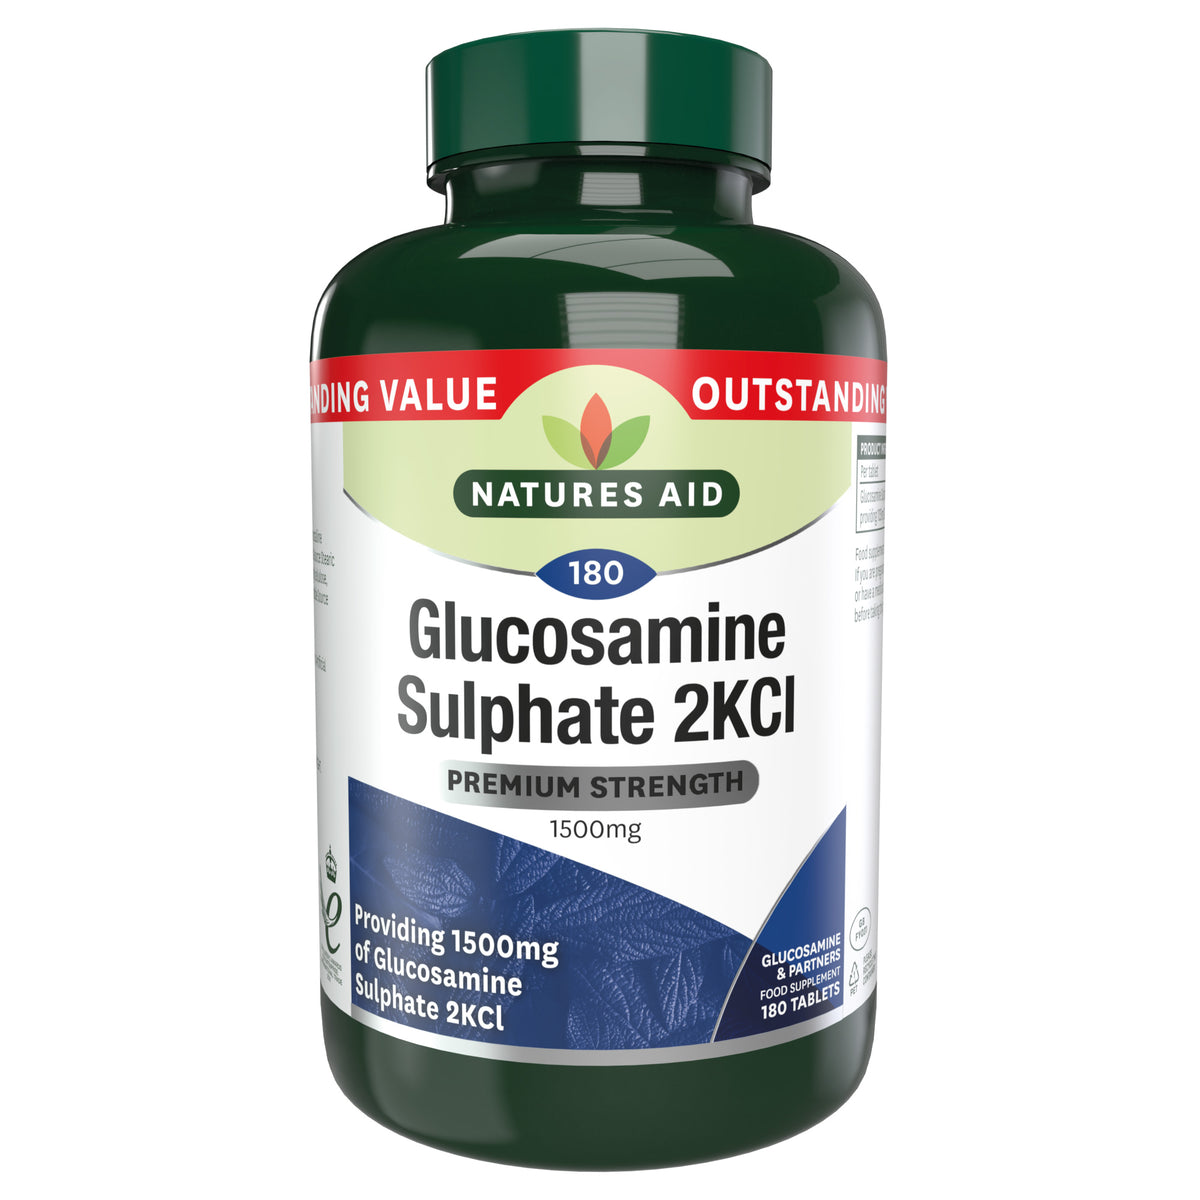 Natures Aid Glucosamine Sulphate 2KCl 1500mg (180)